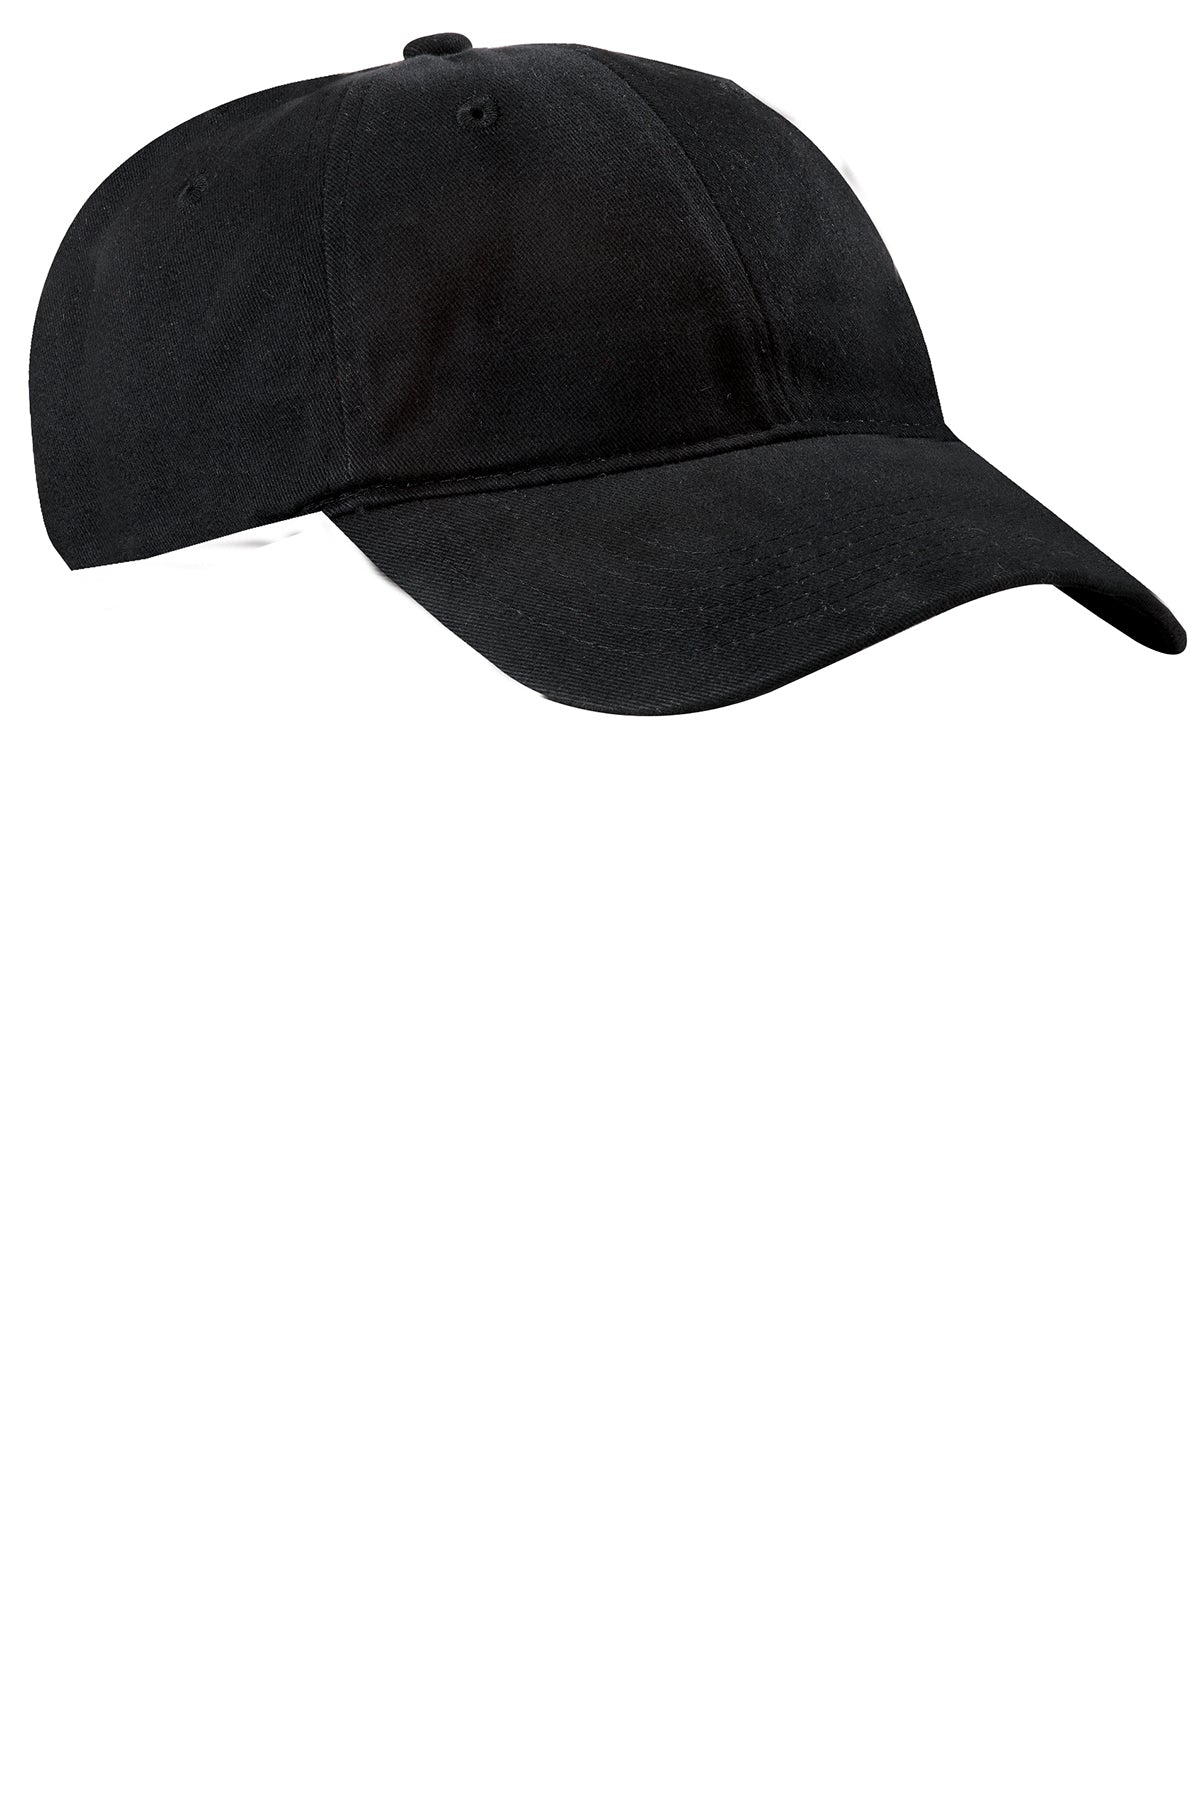 Port & Company Brushed Twill Branded Caps, Black